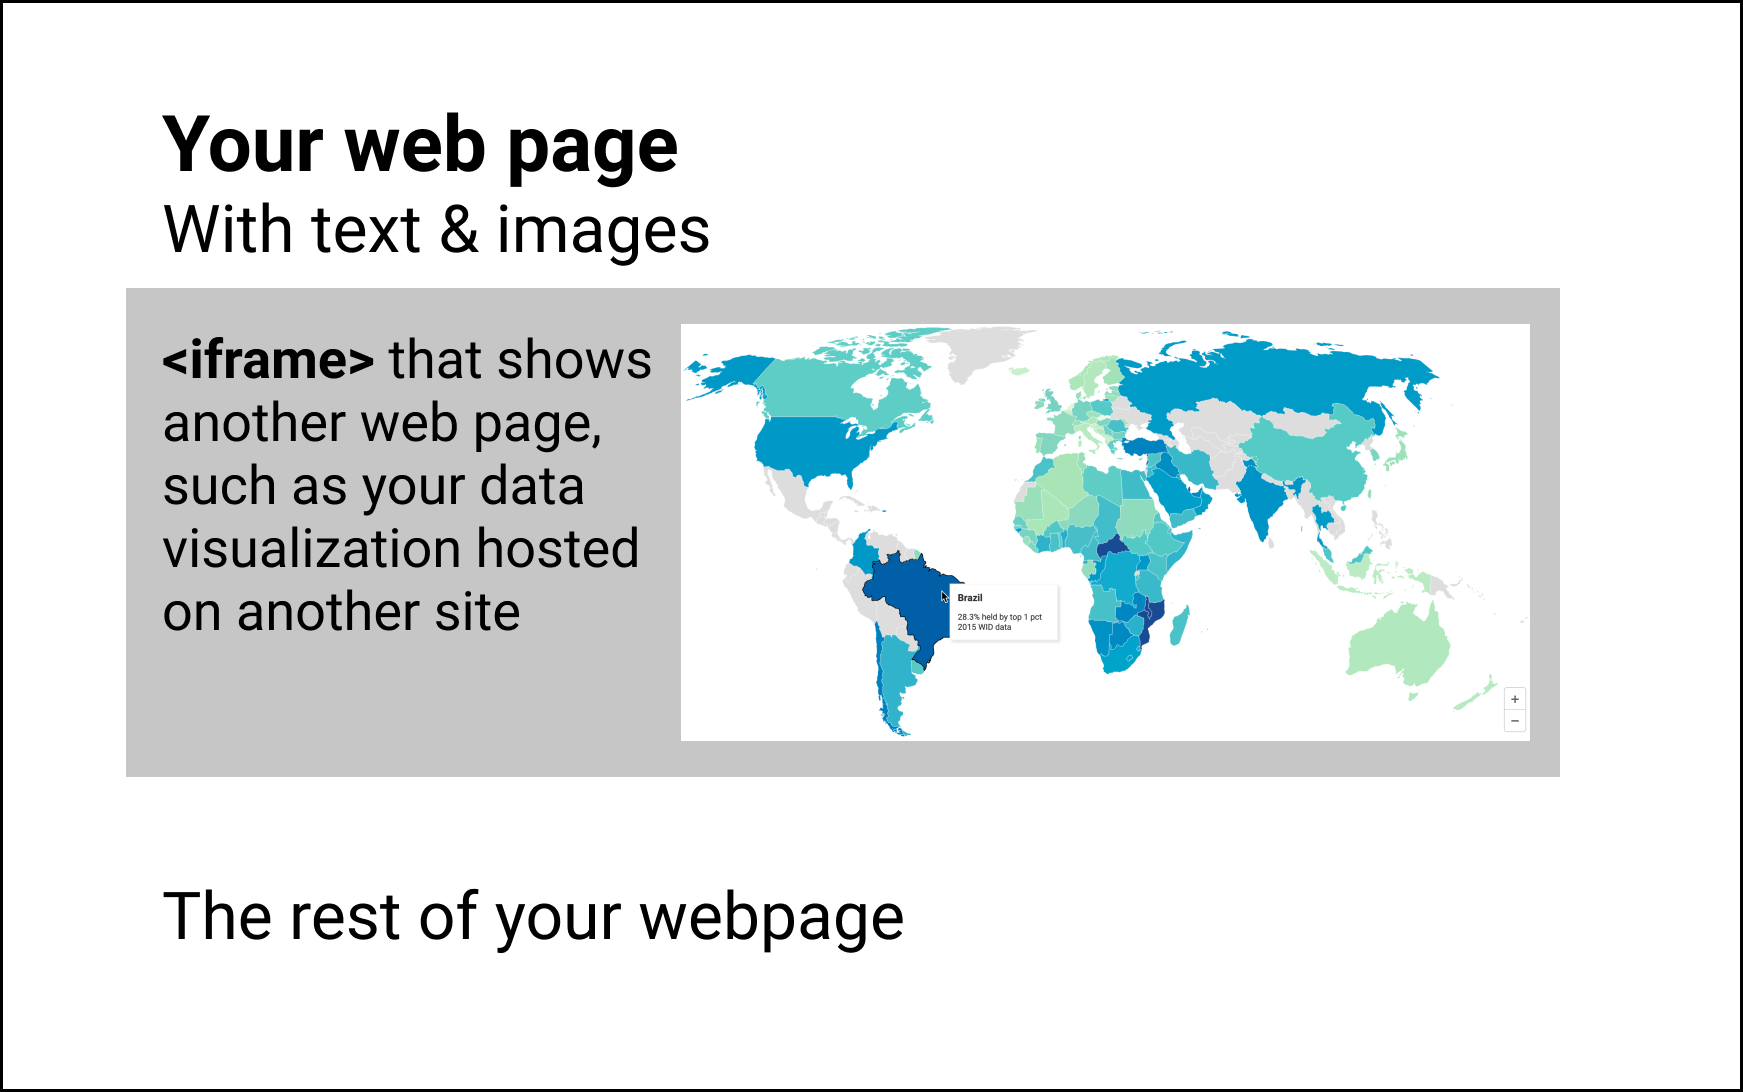 You can use an iframe to embed other web pages in your web page